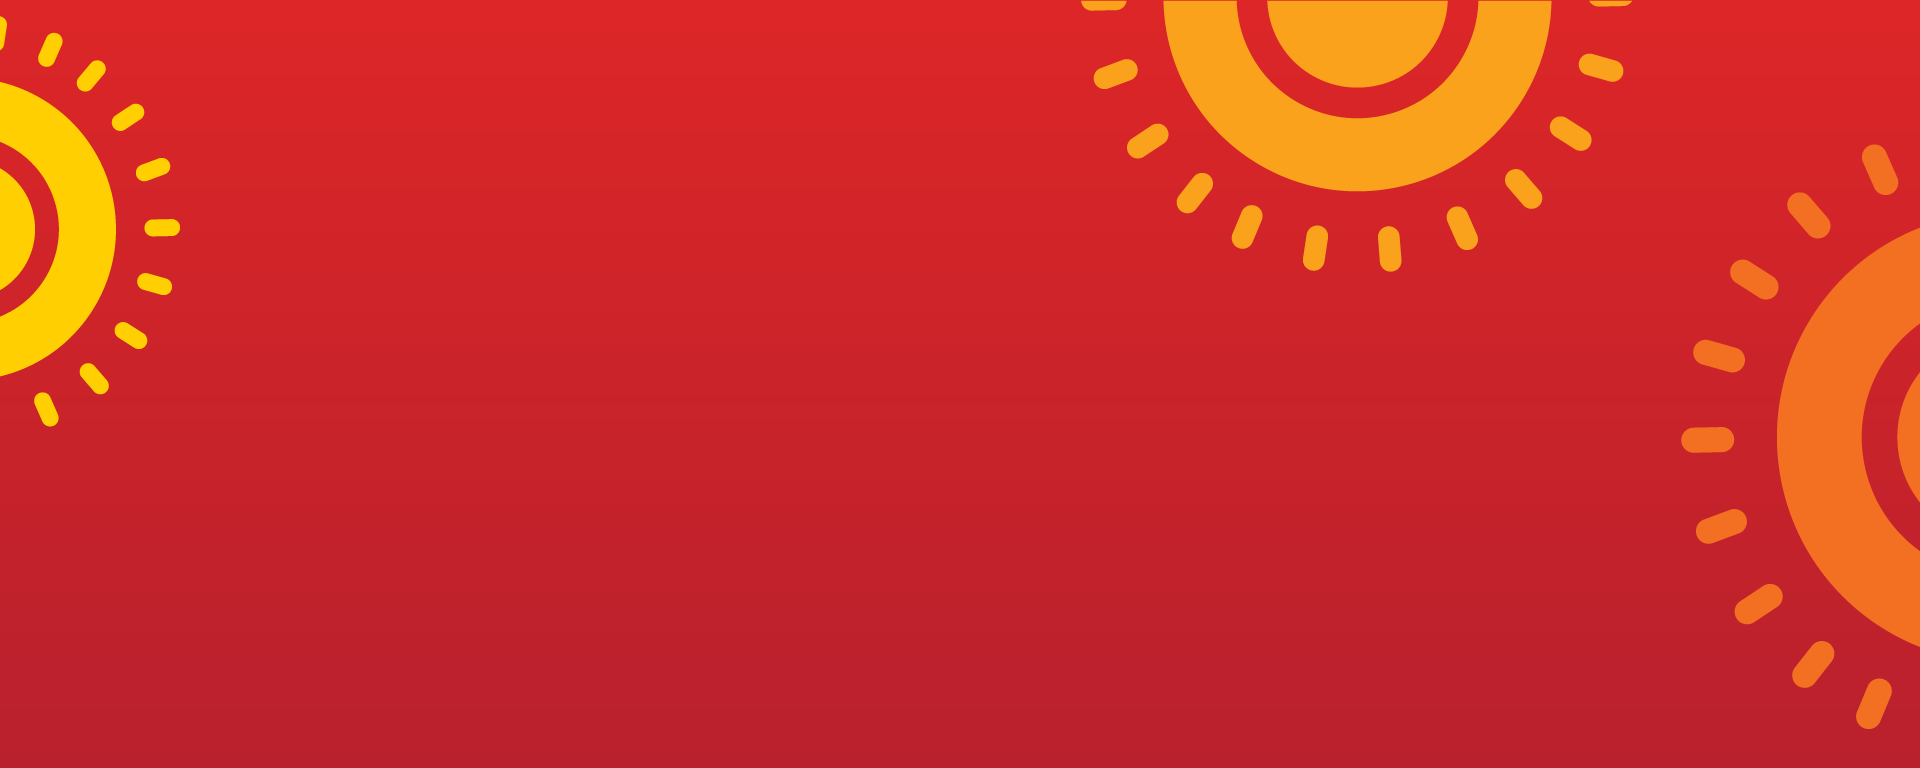 Red background with gold and orange suns